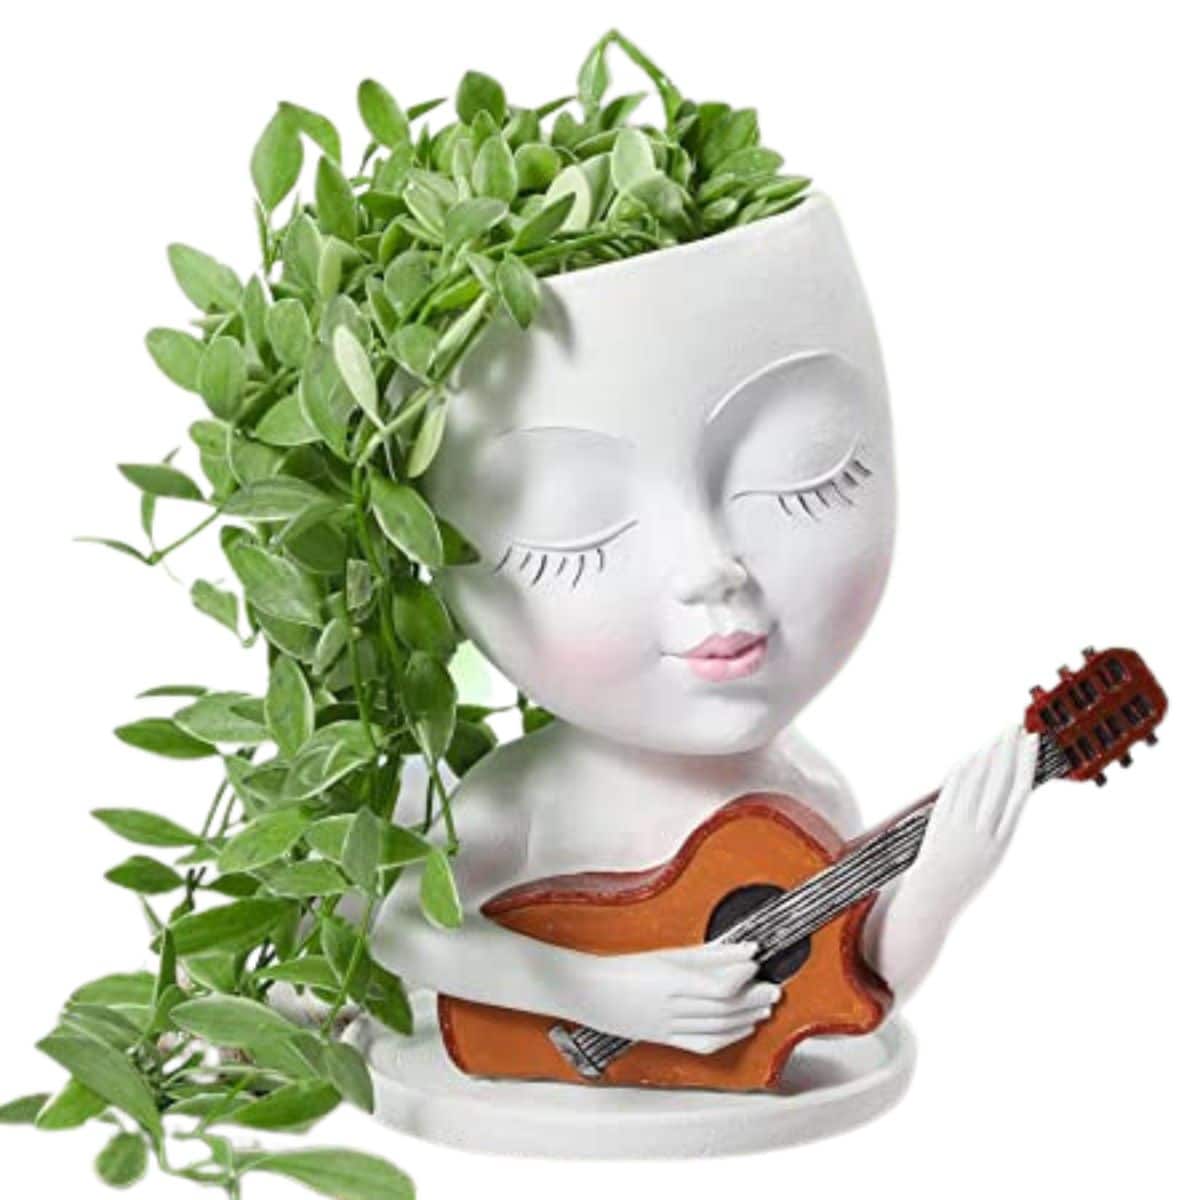 Face Planter Playing The Guitar from Amazon.